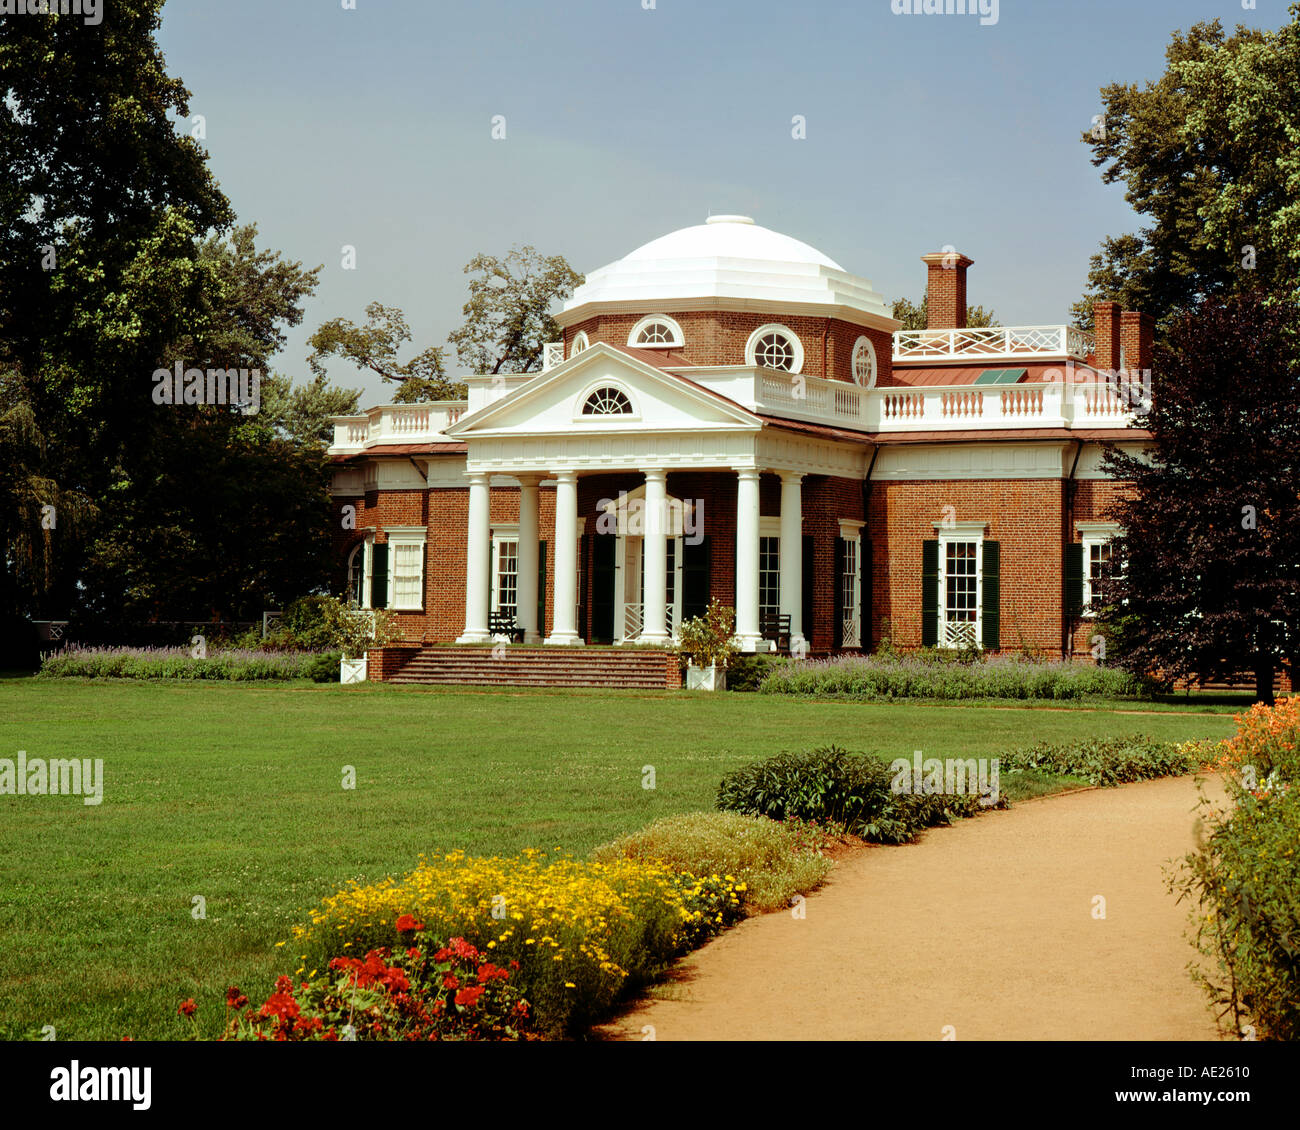 Monticello Virginia home of Americas third president Thomas Jefferson author of the Declaration of Independence Stock Photo